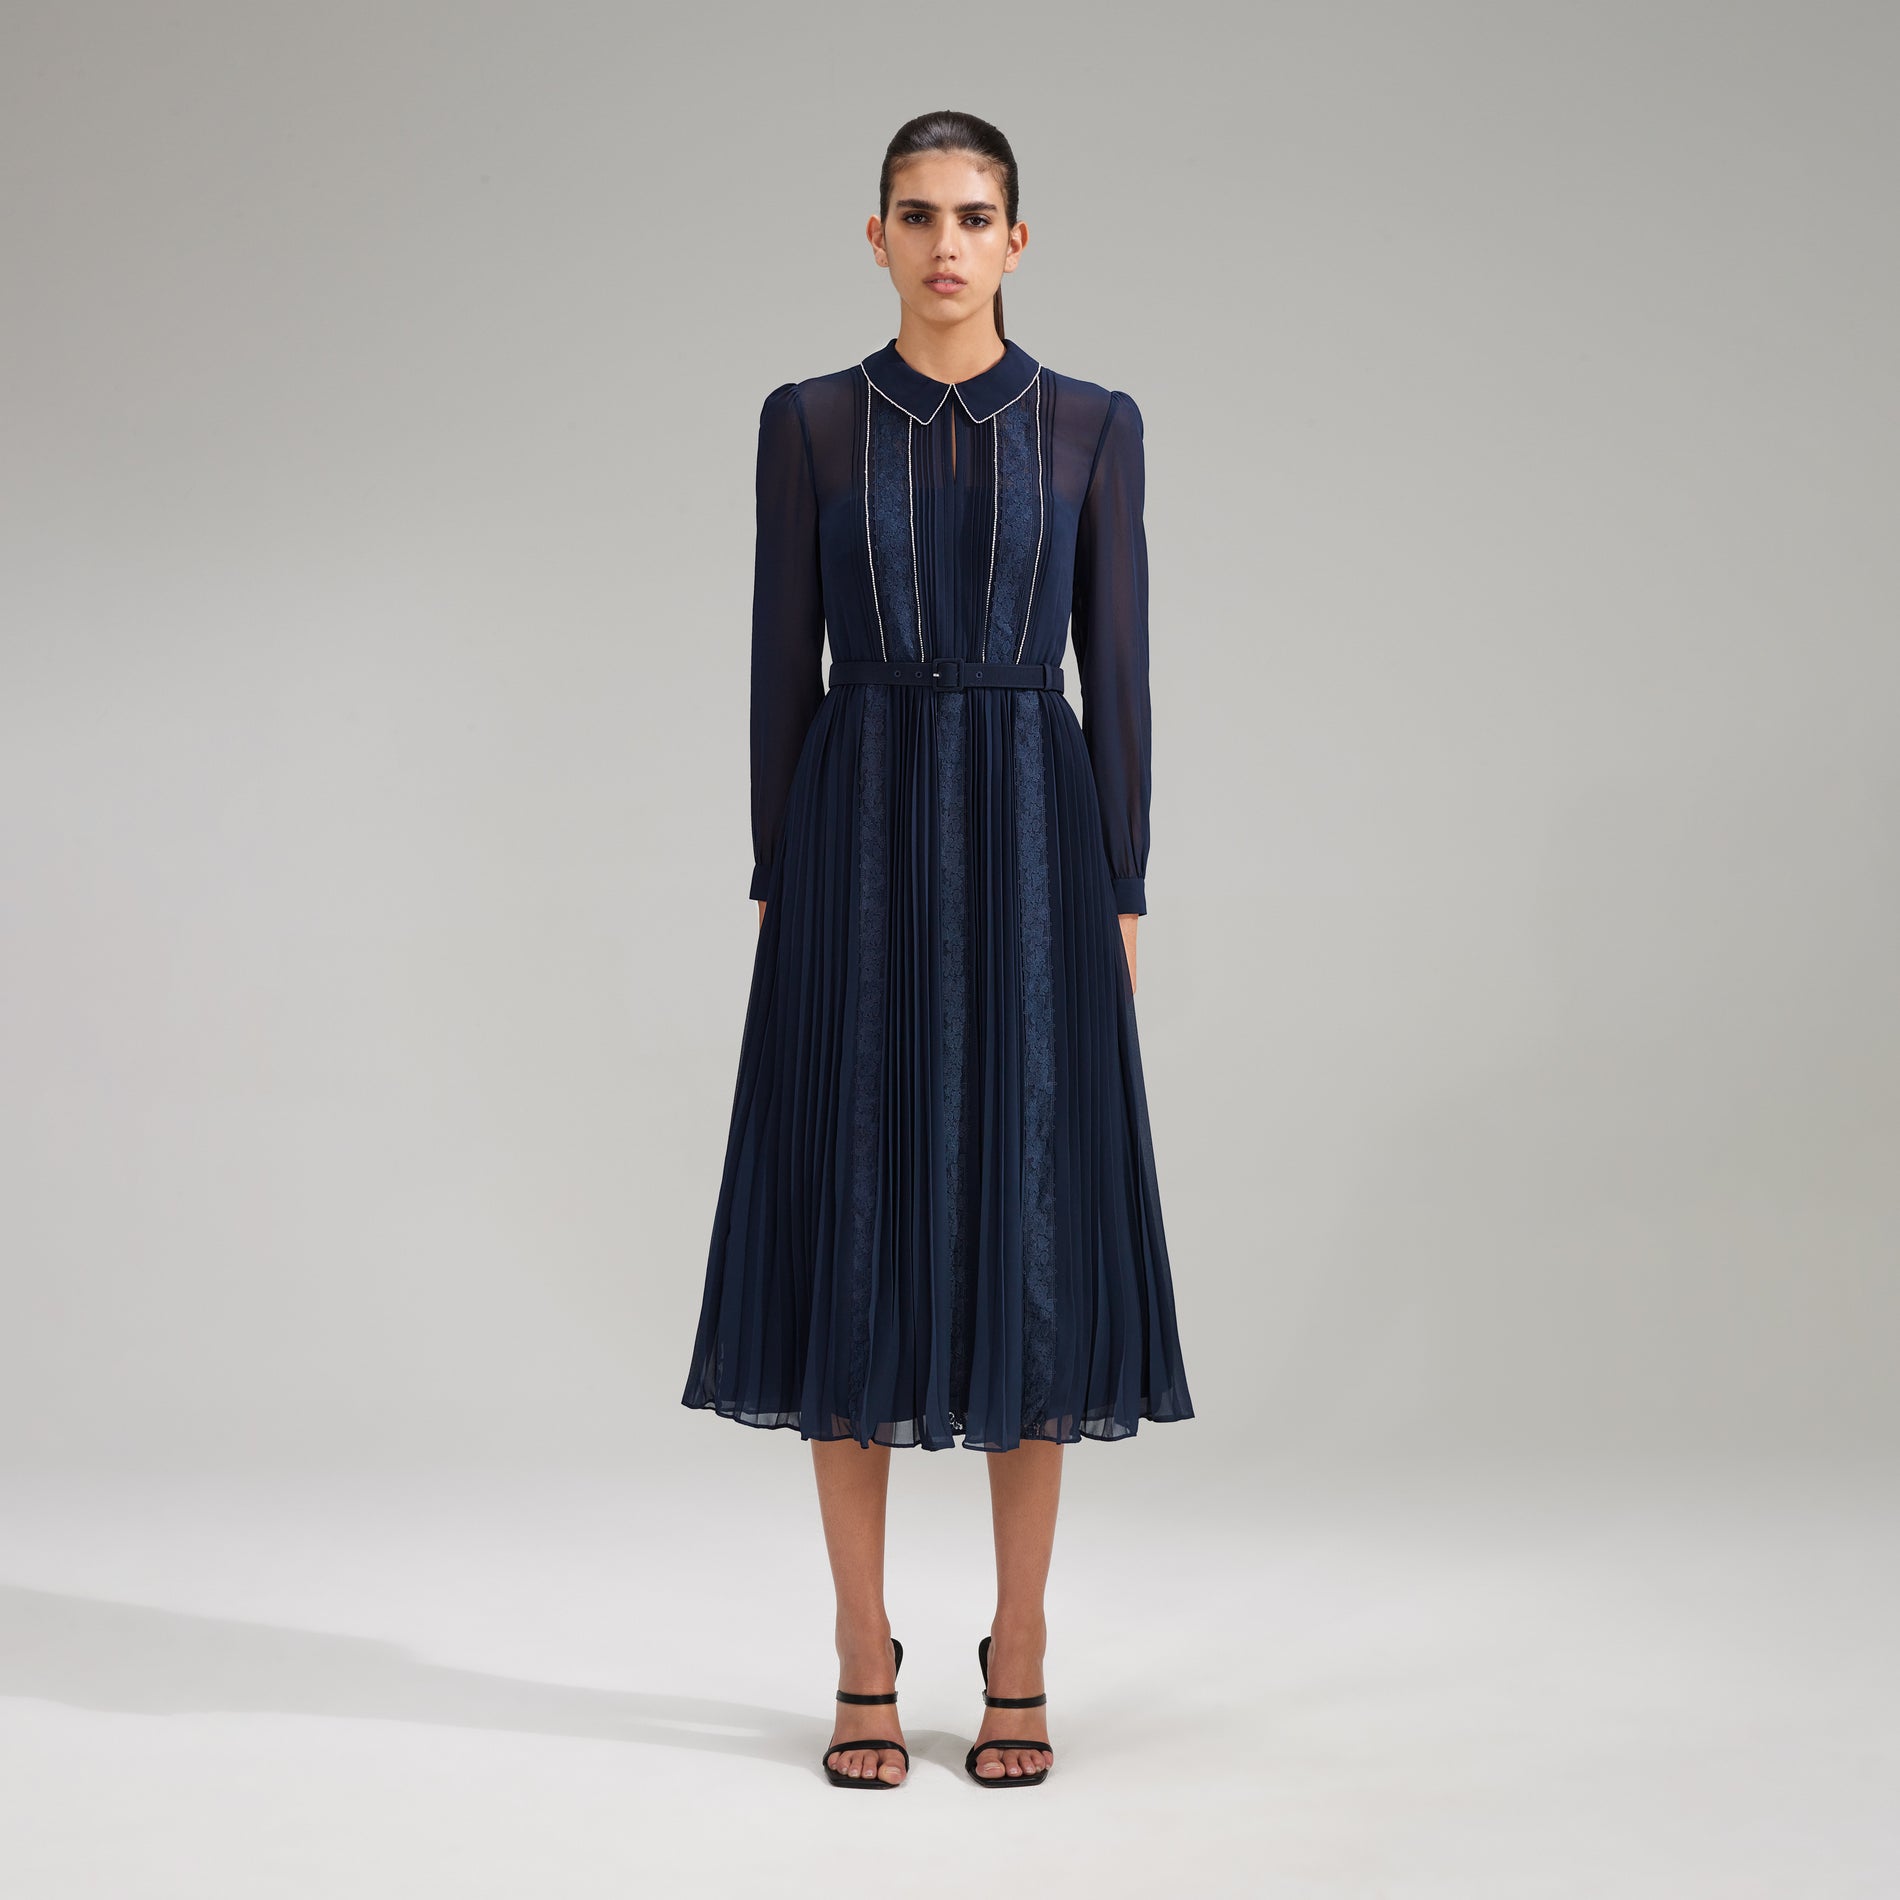 A woman wearing the Navy Pleated Diamante Detail Midi Dress